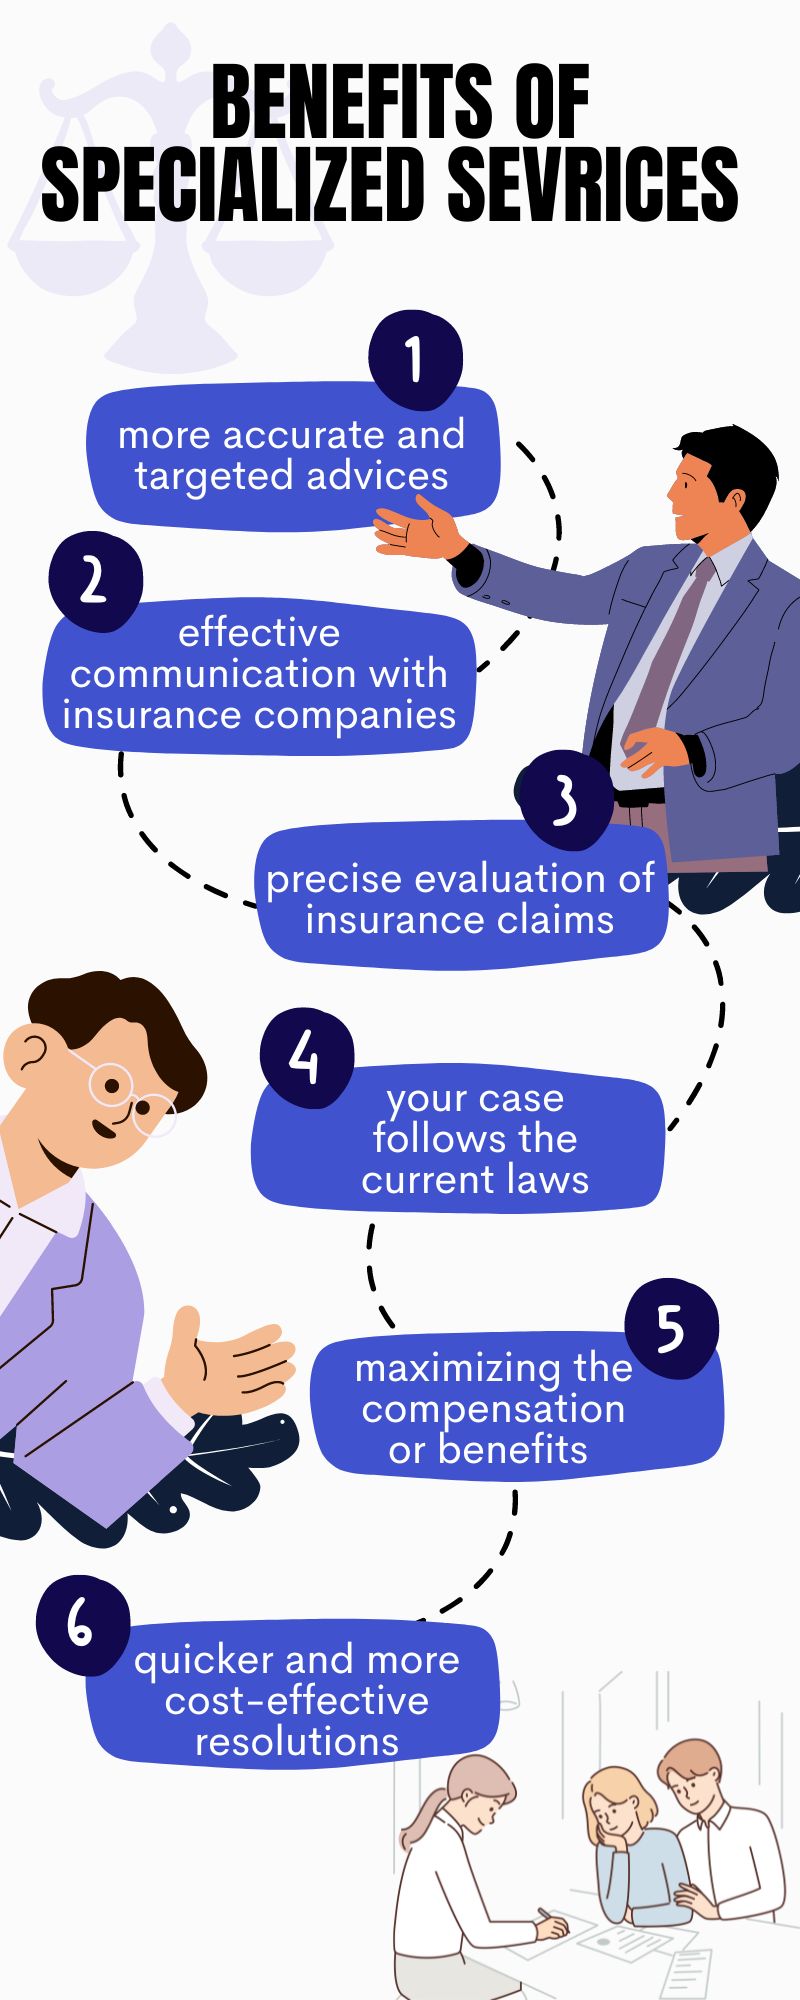 benefits of having a niche expert insurance lawyer by your side, insurance lawyers infographic